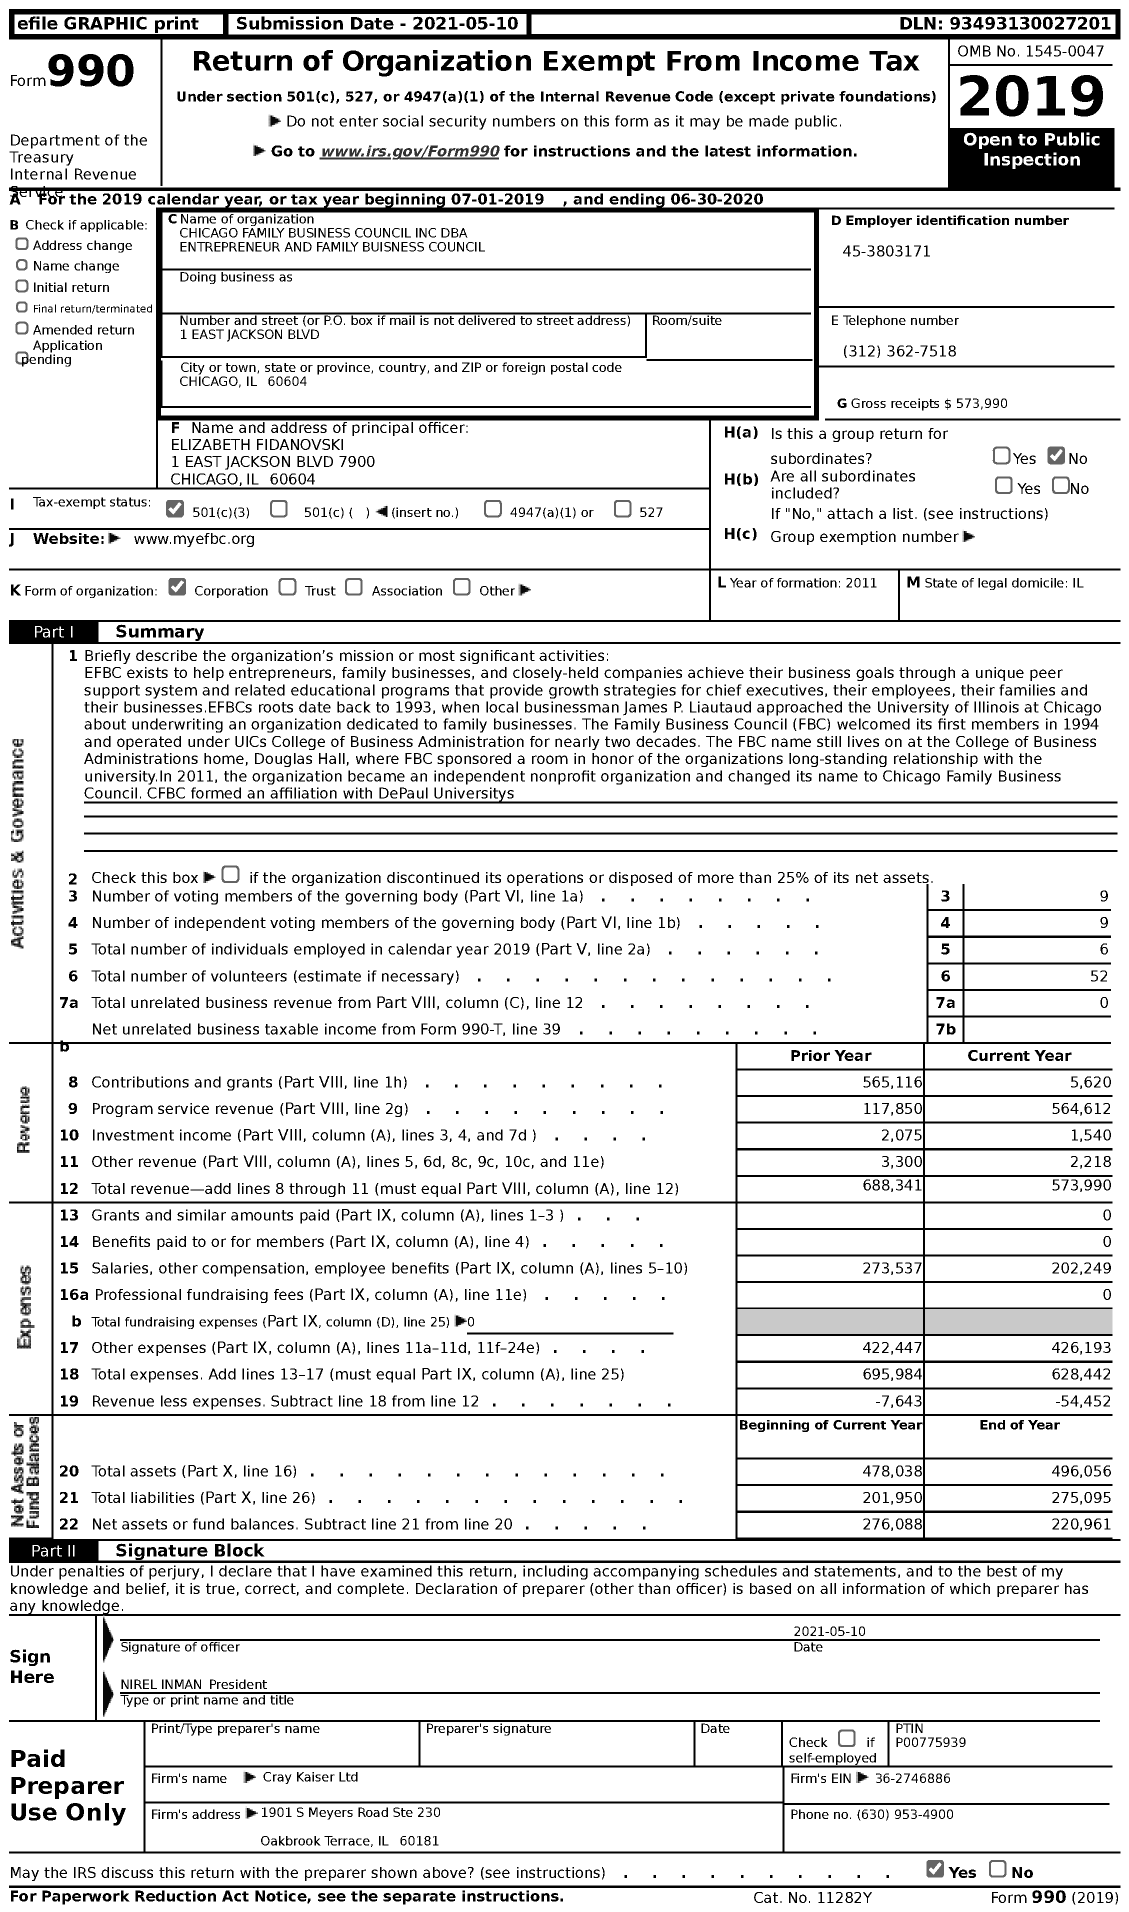 Image of first page of 2019 Form 990 for Entrepreneur and Family Buisness Council